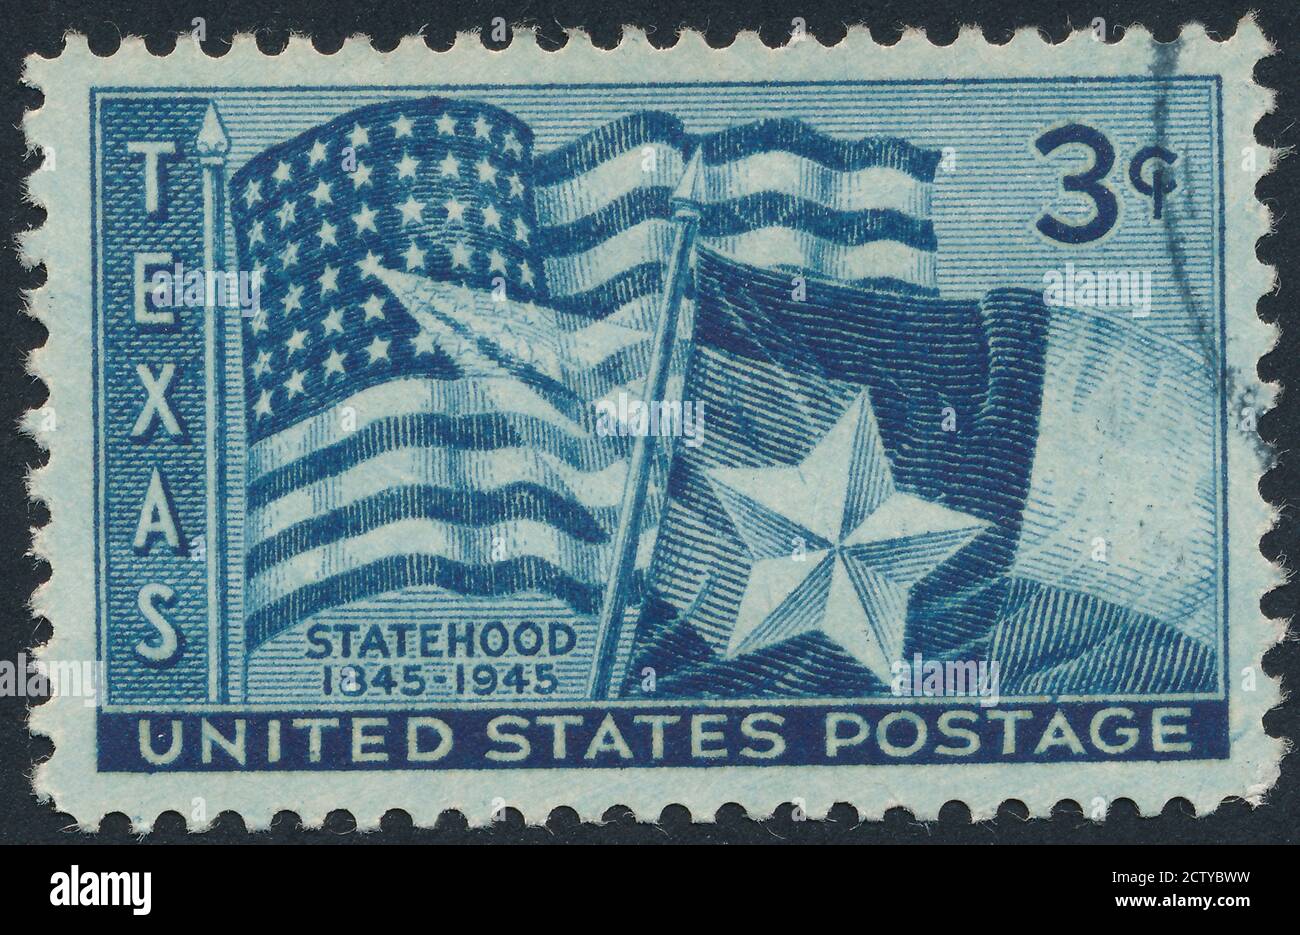 Texas Stamp stock photo.Cancelled Stamp From The United States Featuring The State Of Texas Stock Photo